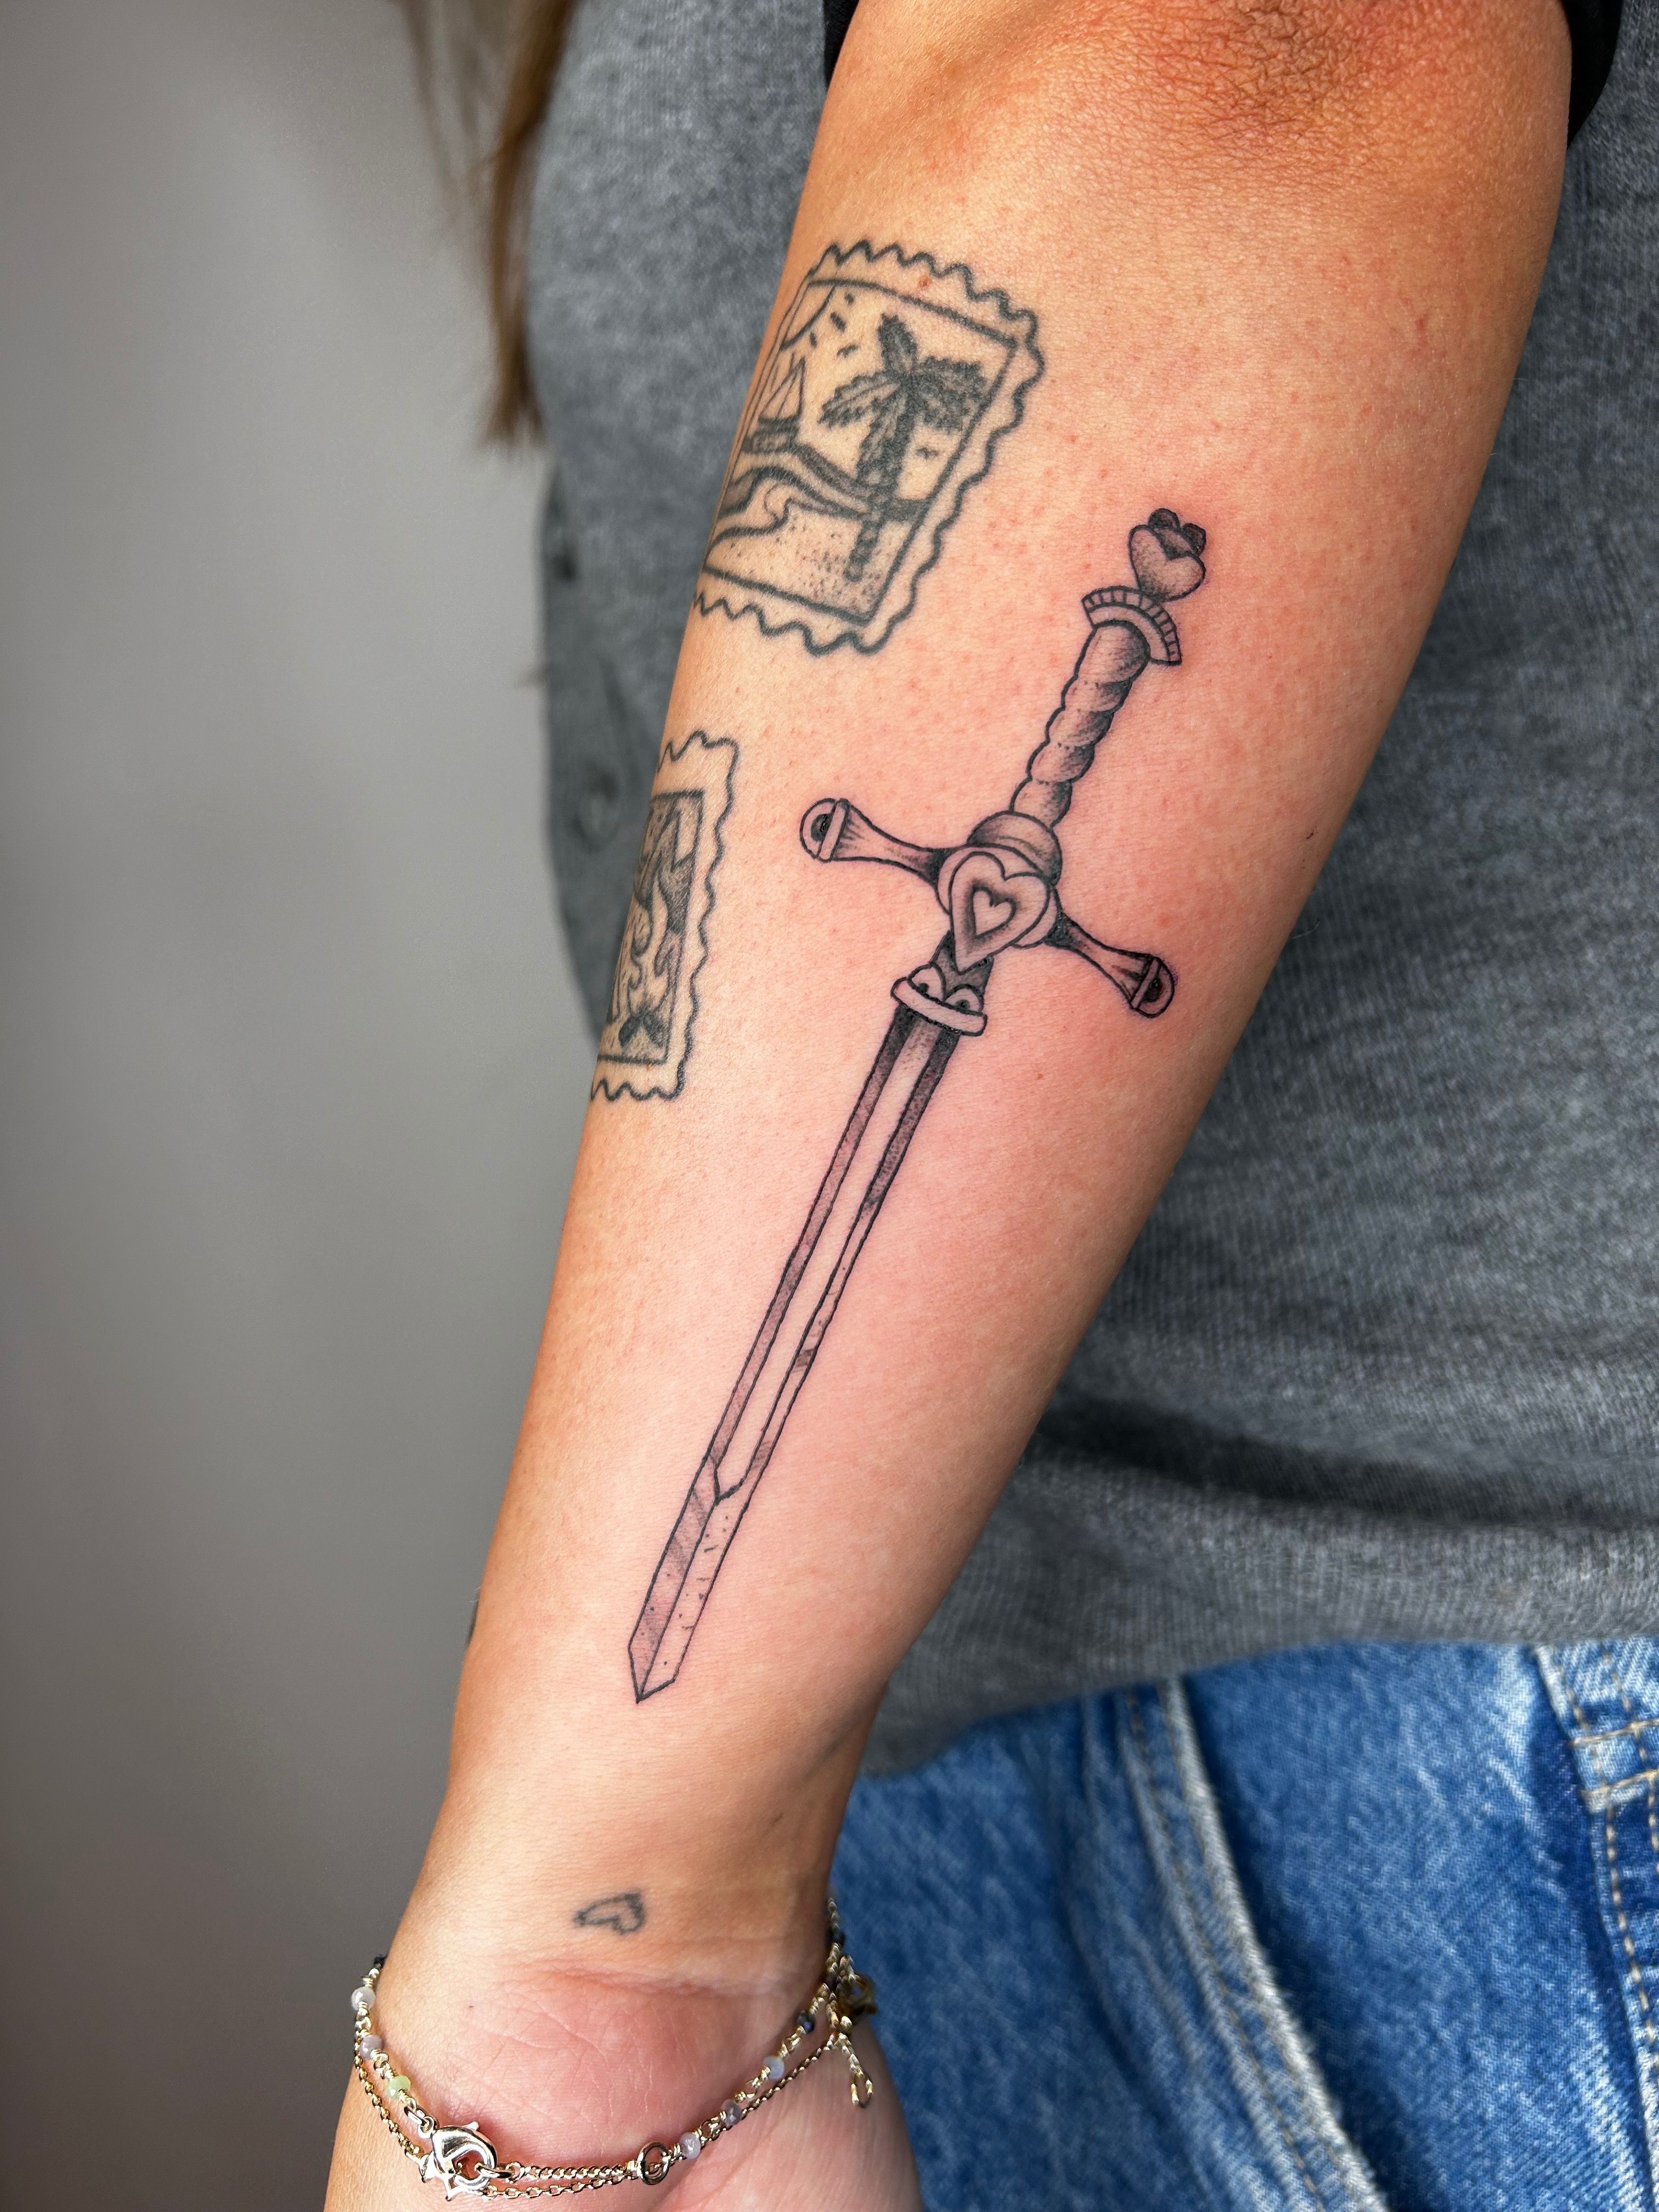 Okami Tattoo - Crossed swords for Geralt and Ciri from The... | Facebook